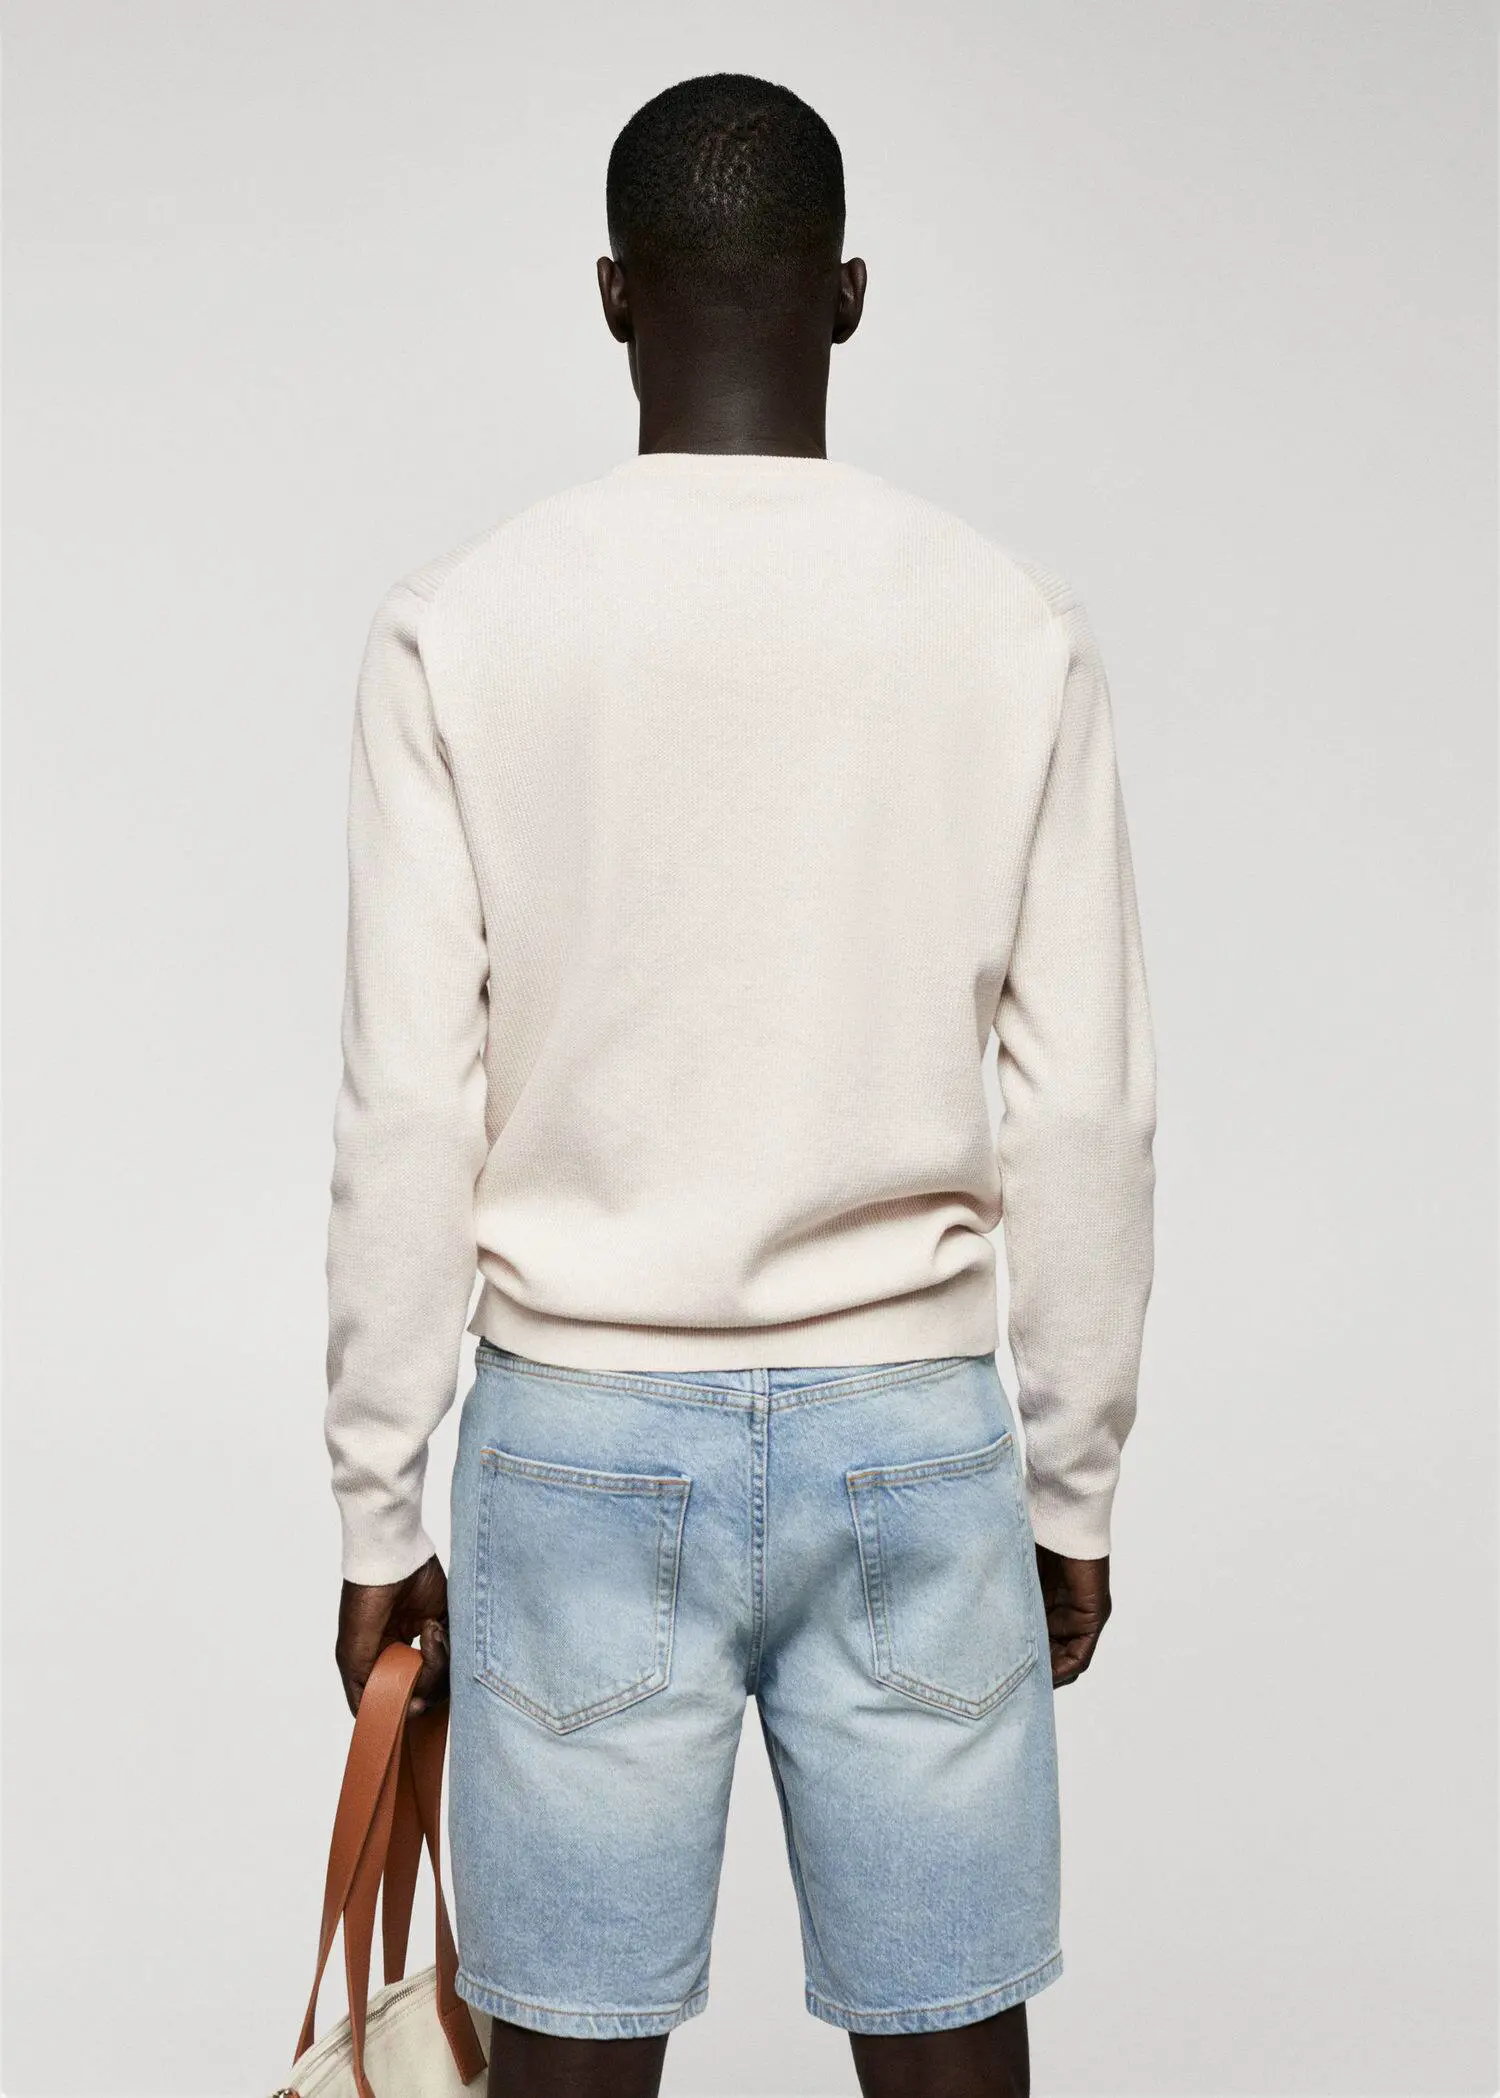 Mango Structured cotton sweater. a man wearing a white sweater and jeans. 